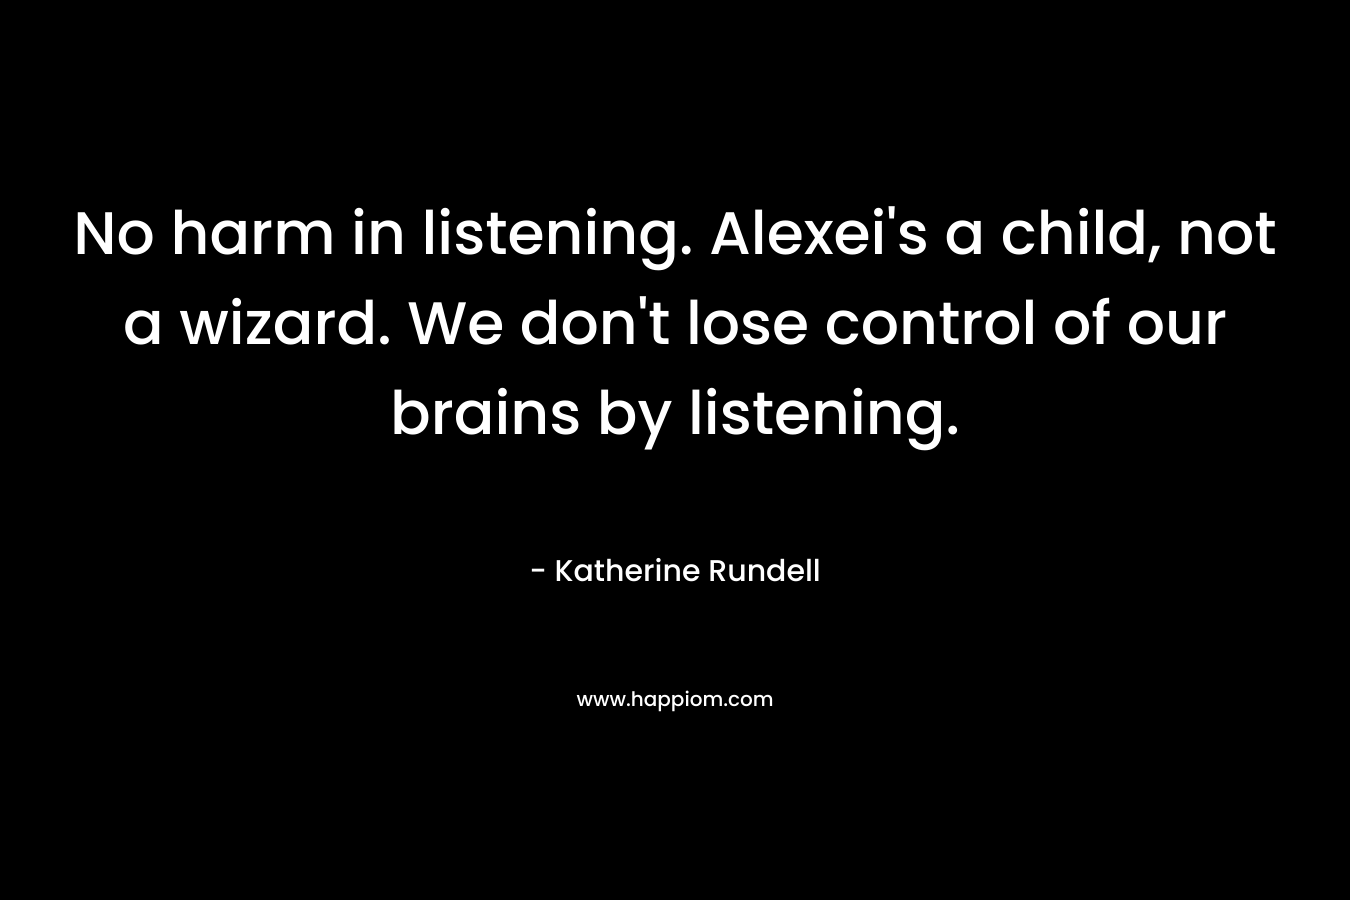 No harm in listening. Alexei's a child, not a wizard. We don't lose control of our brains by listening.